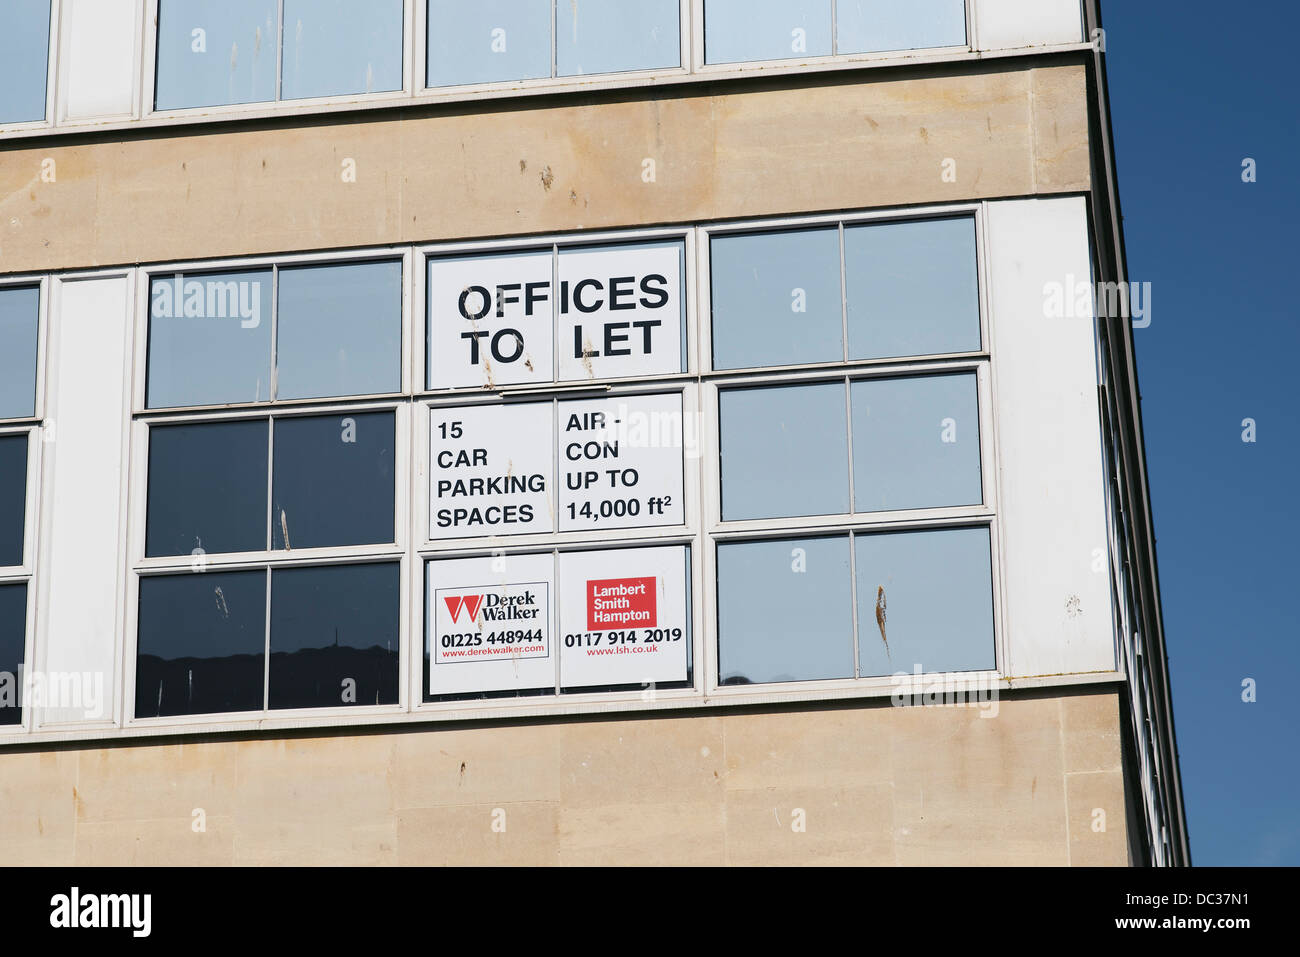 Affitto uffici SIGN IN BATH SOMERSET Foto Stock